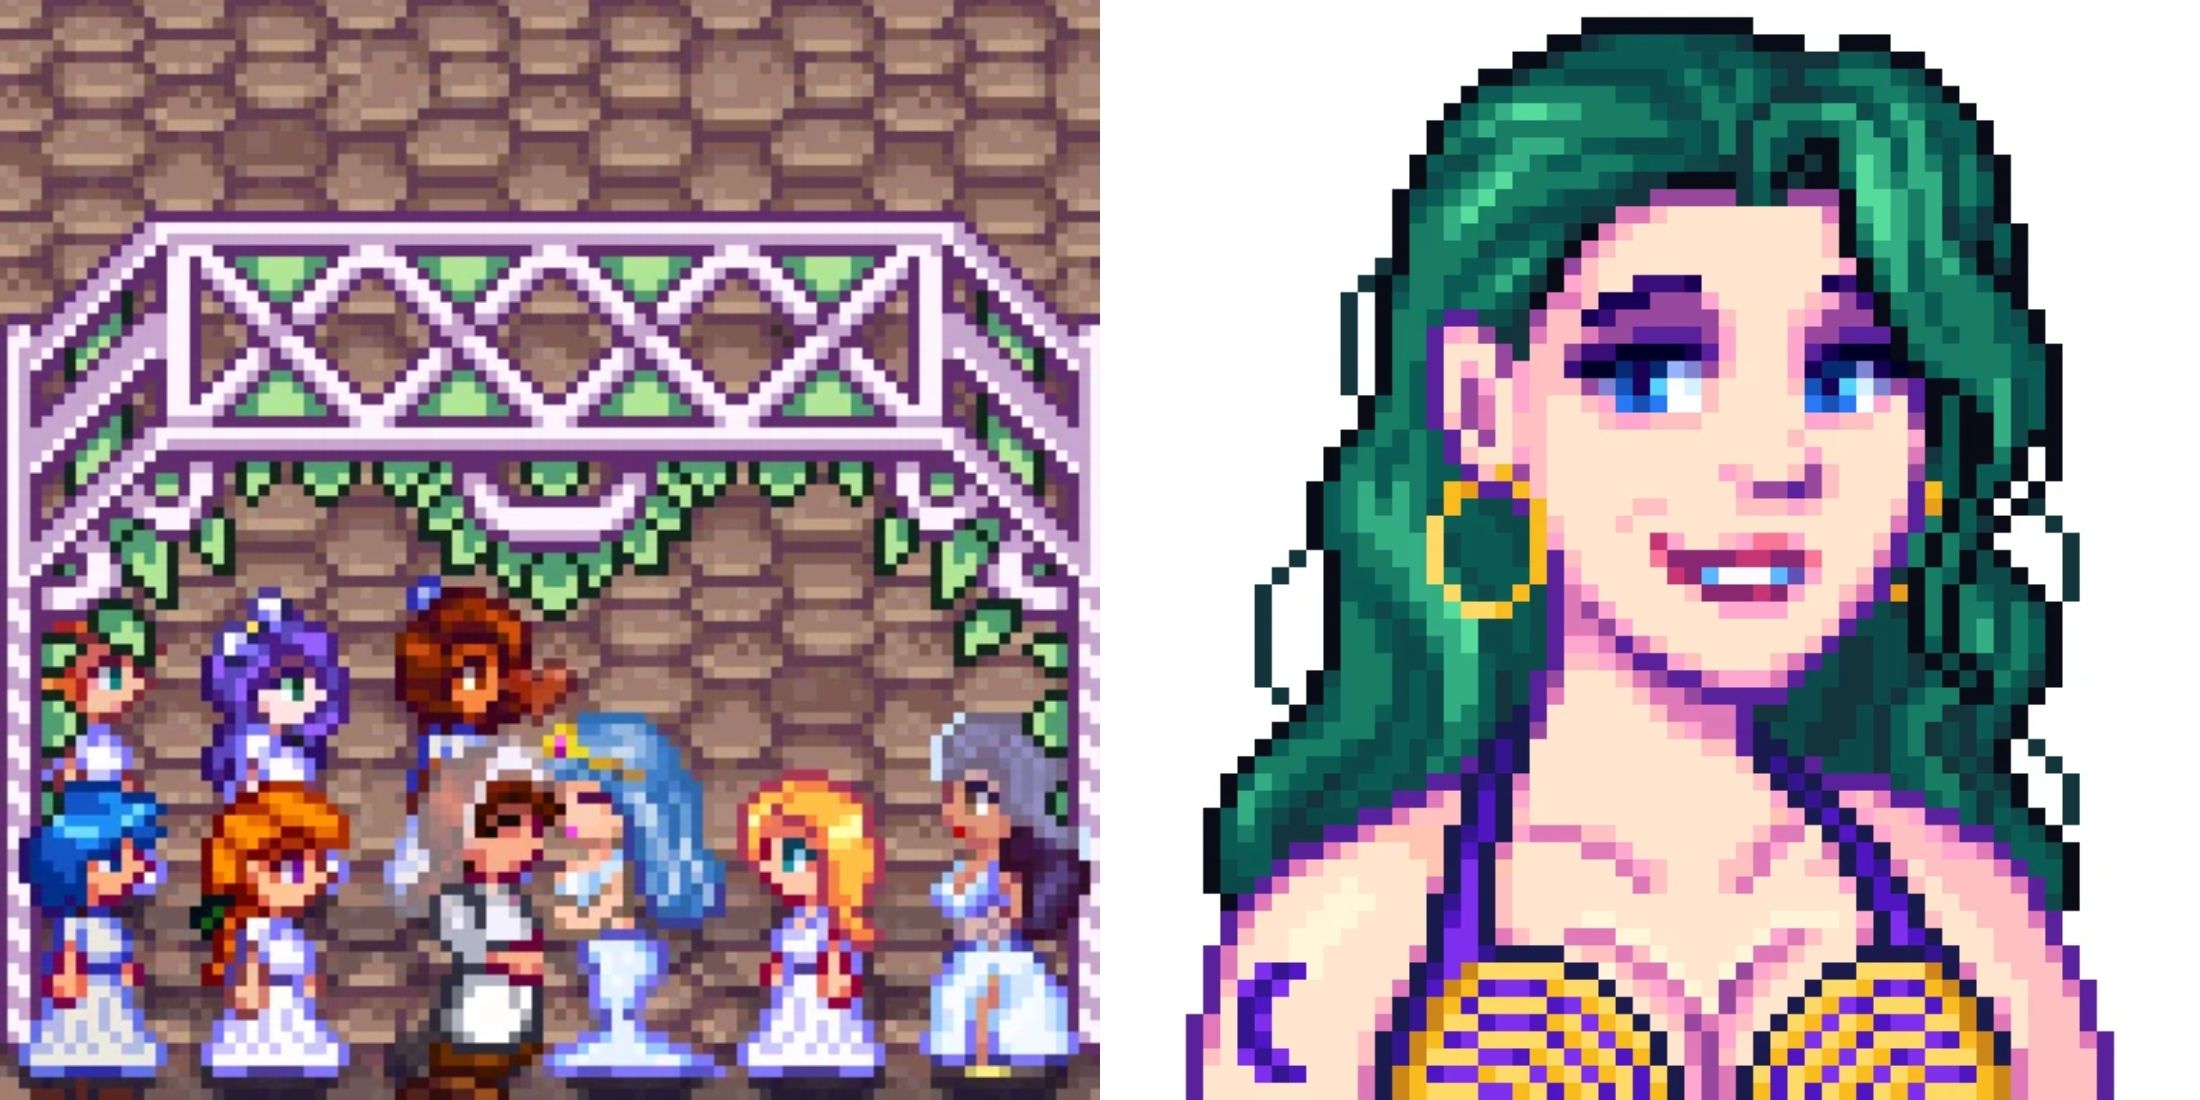 Stardew Valley Polyamory Sweet mod with characters marrying multiple wives and a new NPC to oversee items